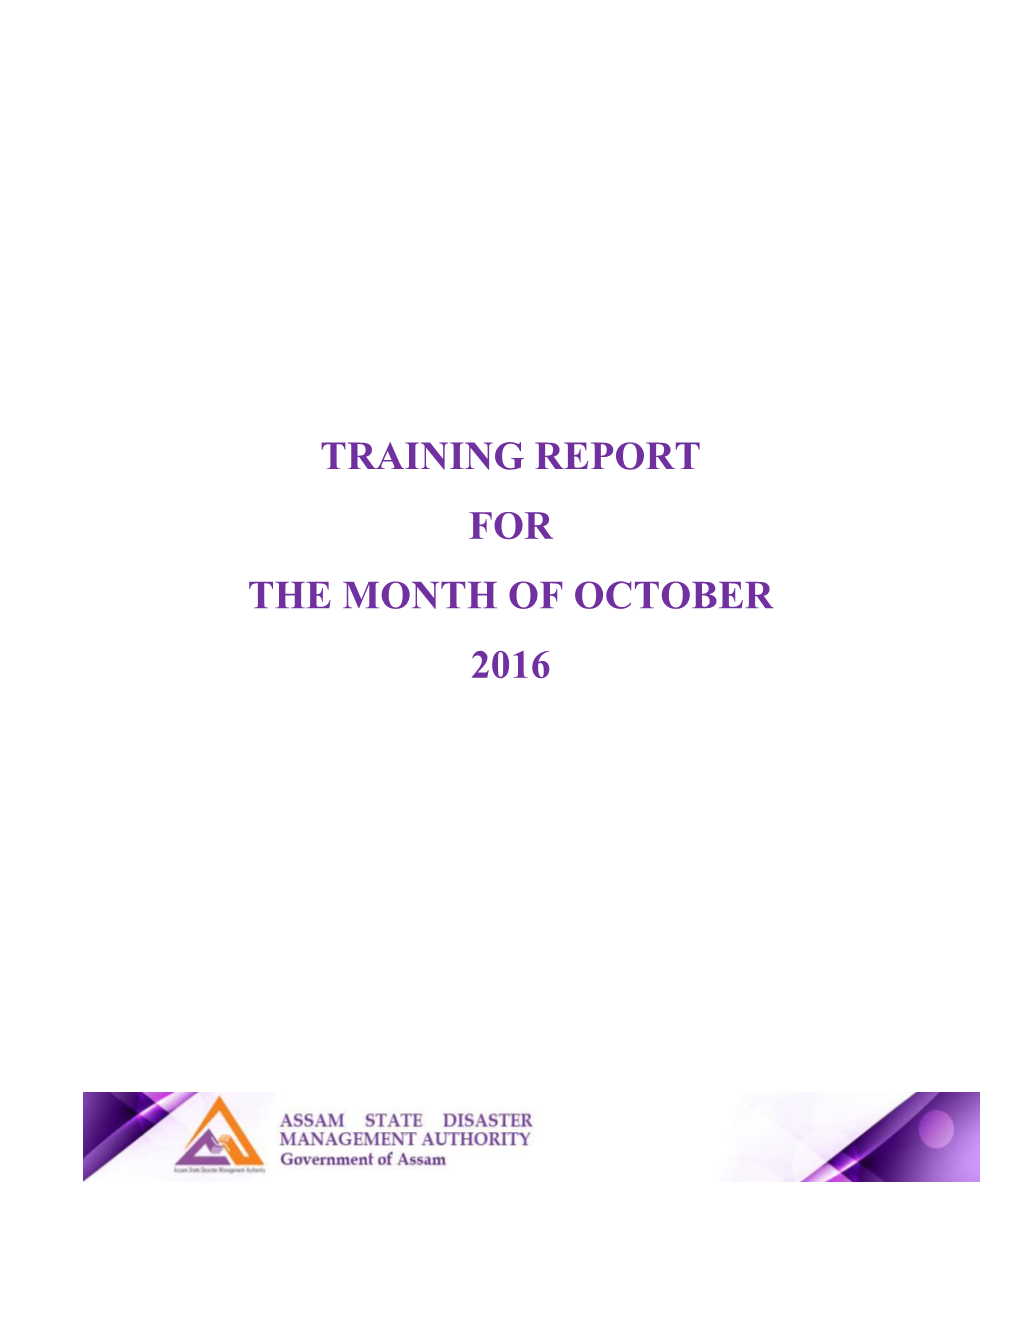 Training Report for the Month of October 2016